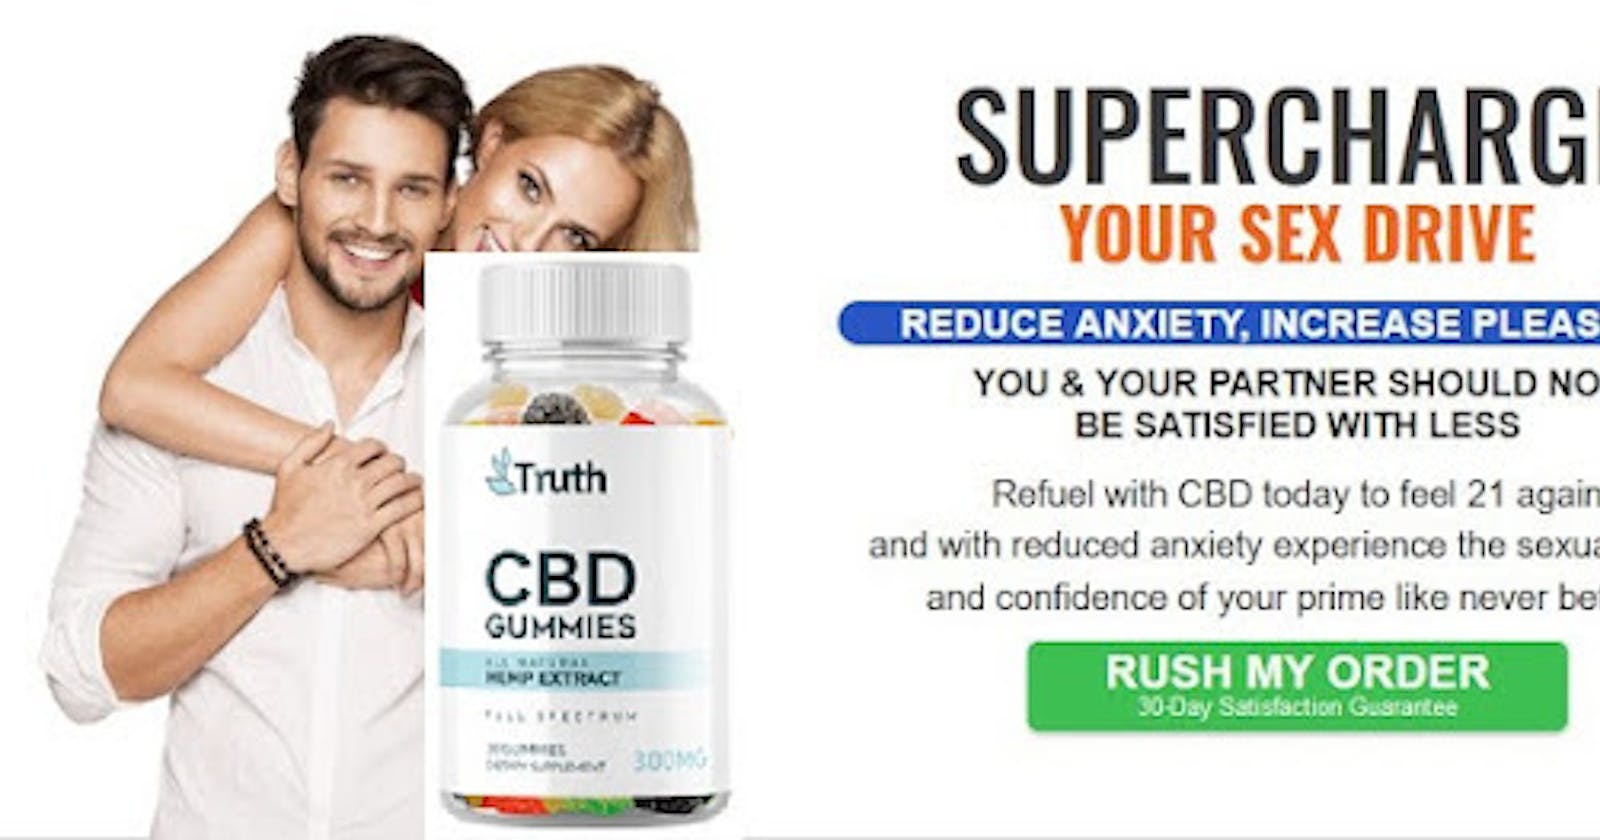 Truth CBD Gummies For ED Supplement Ingredients That Work or Not ?